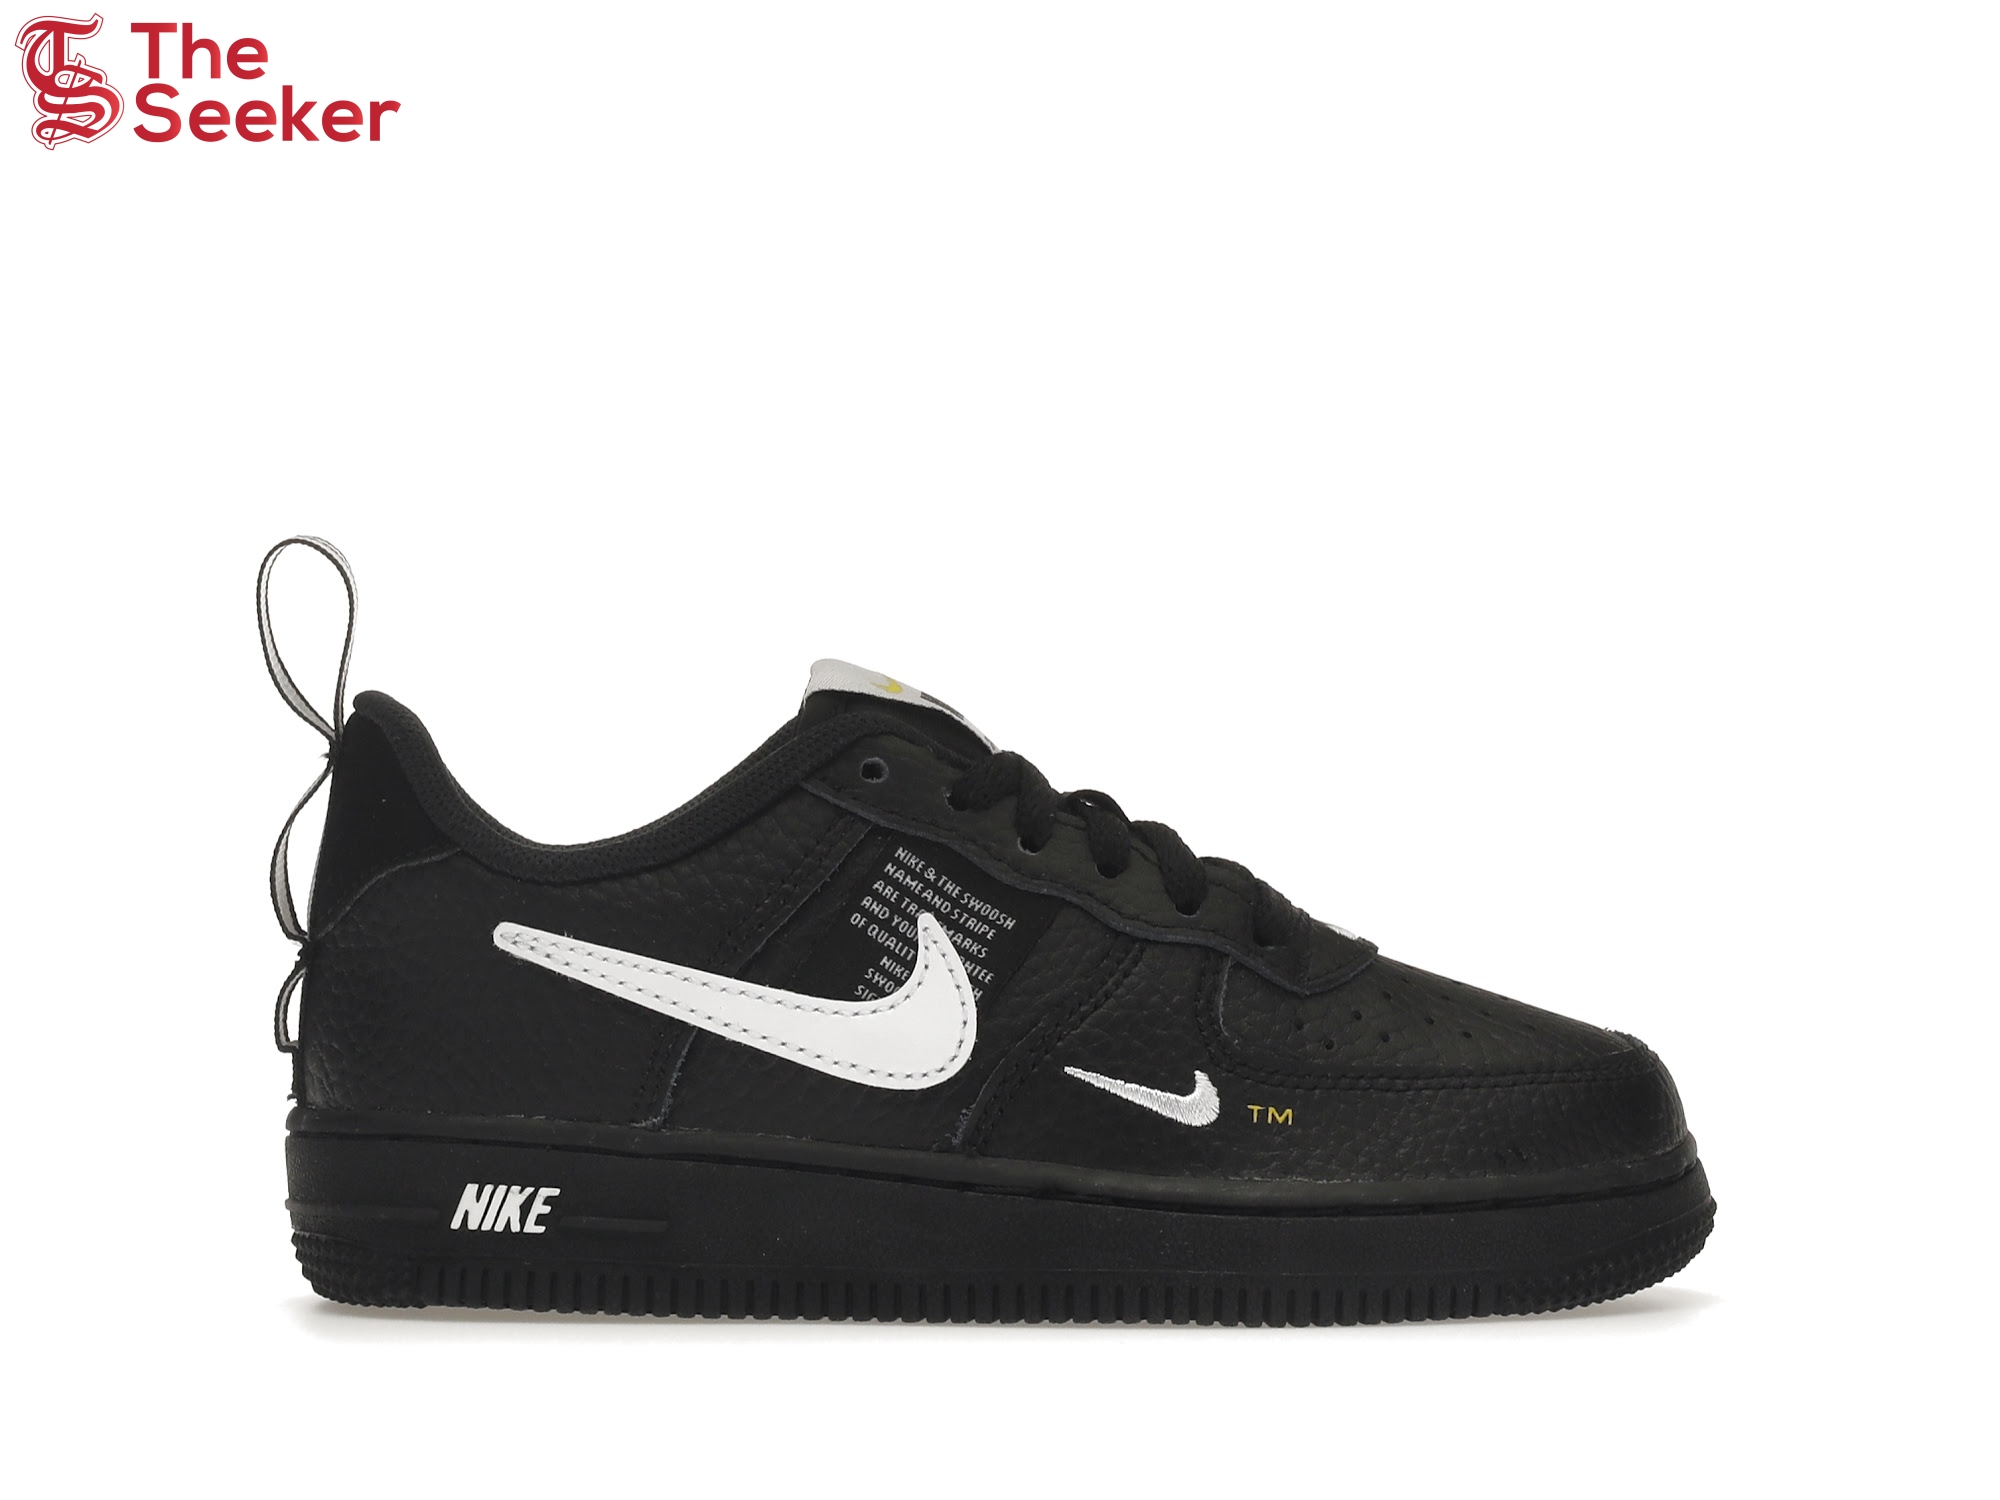 Nike Air Force 1 Low LV8 Utility Black White (PS)